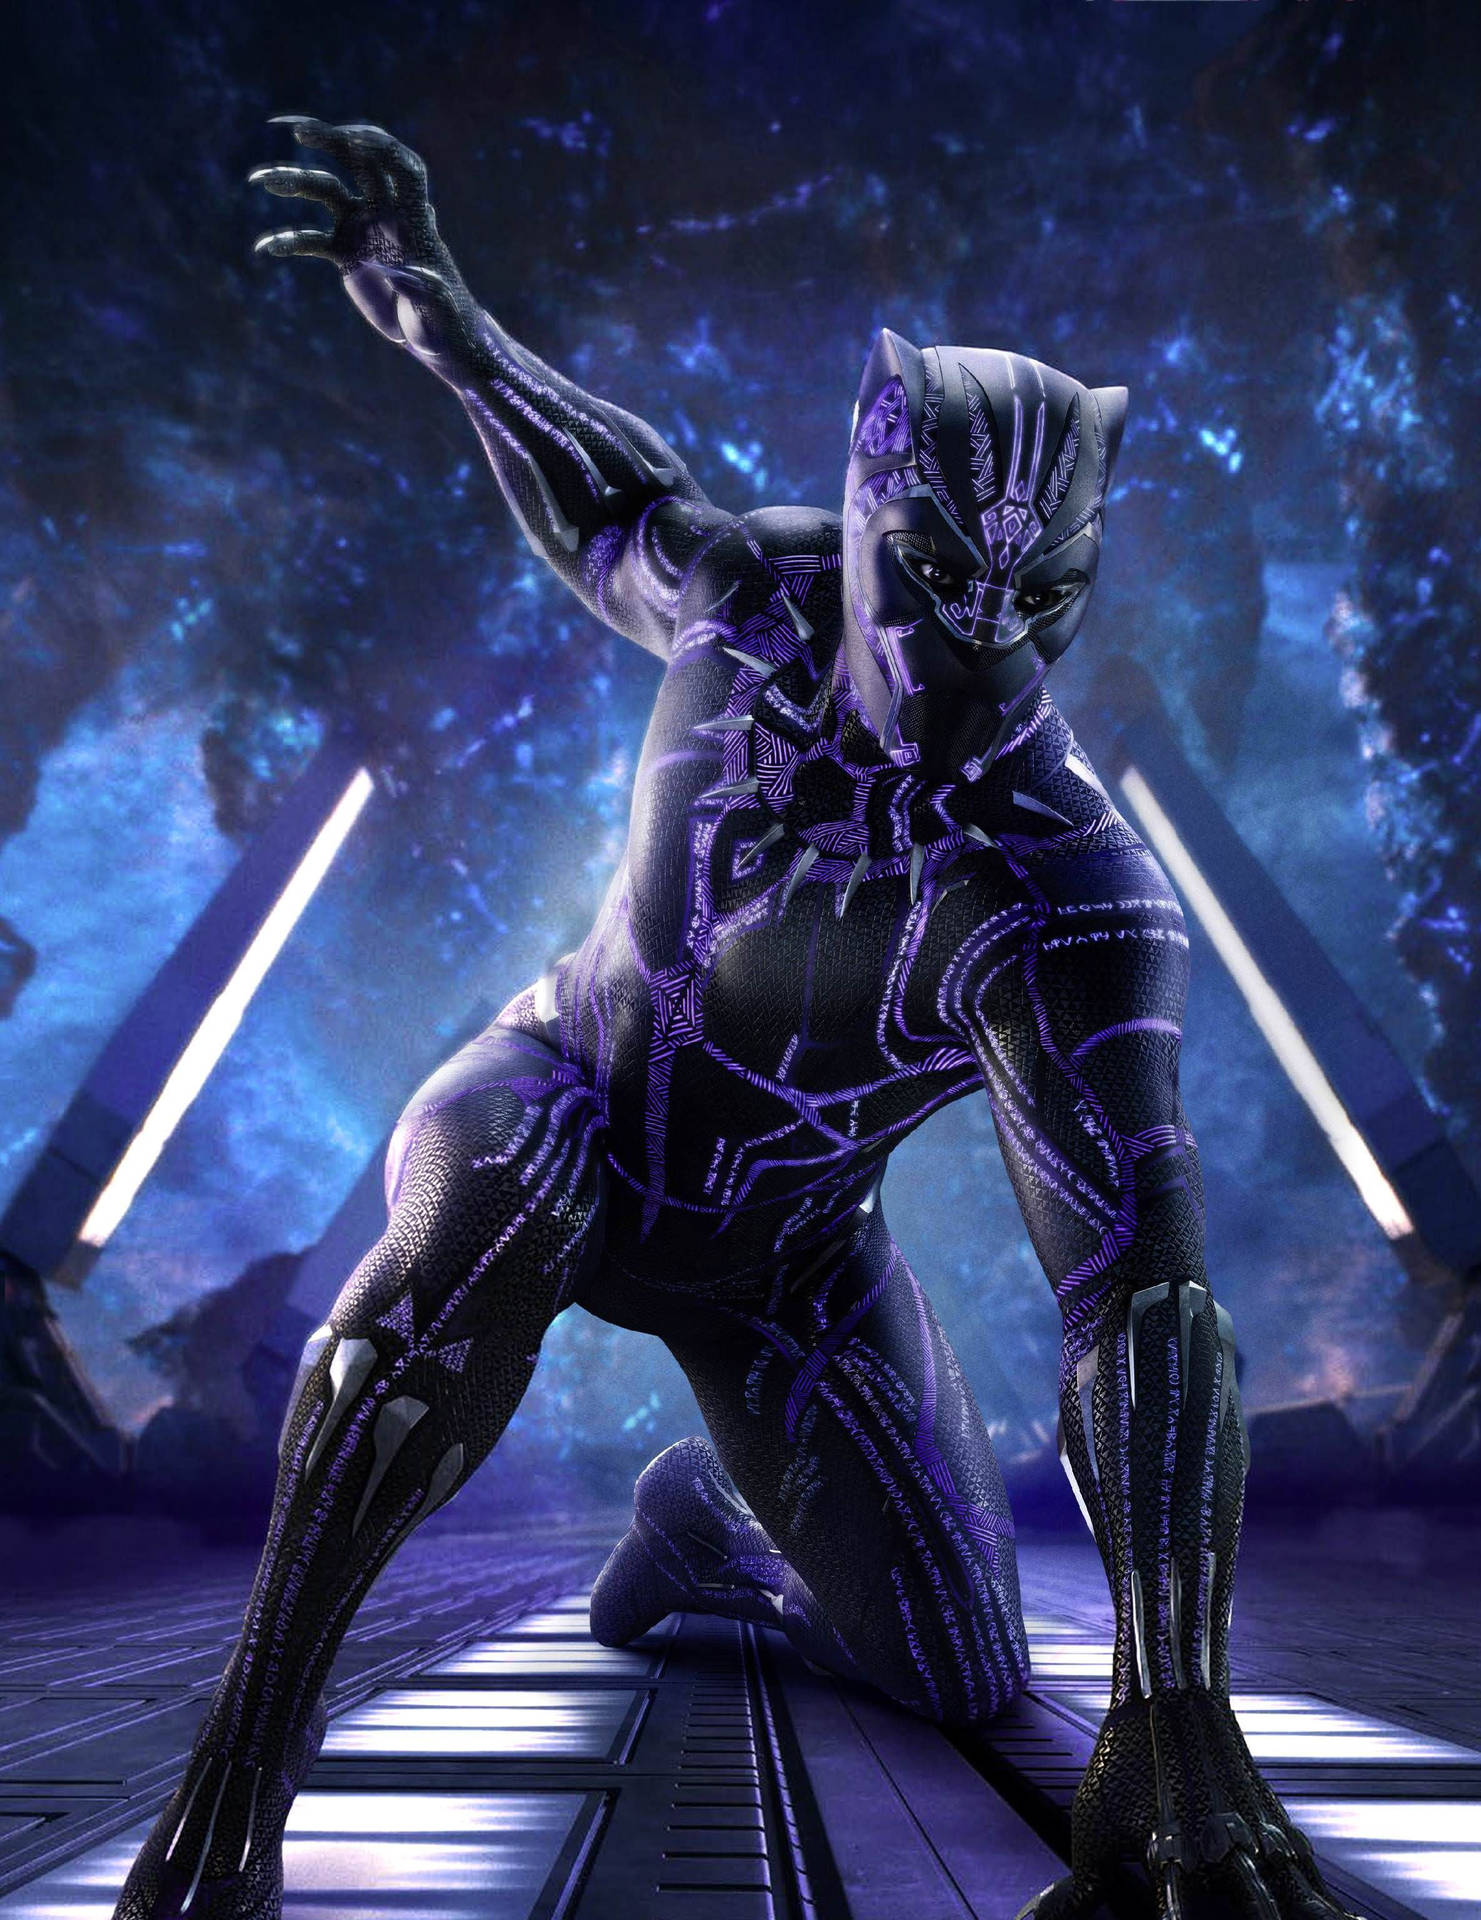 Get Ready to Experience Wakanda with Black Panther Wallpaper